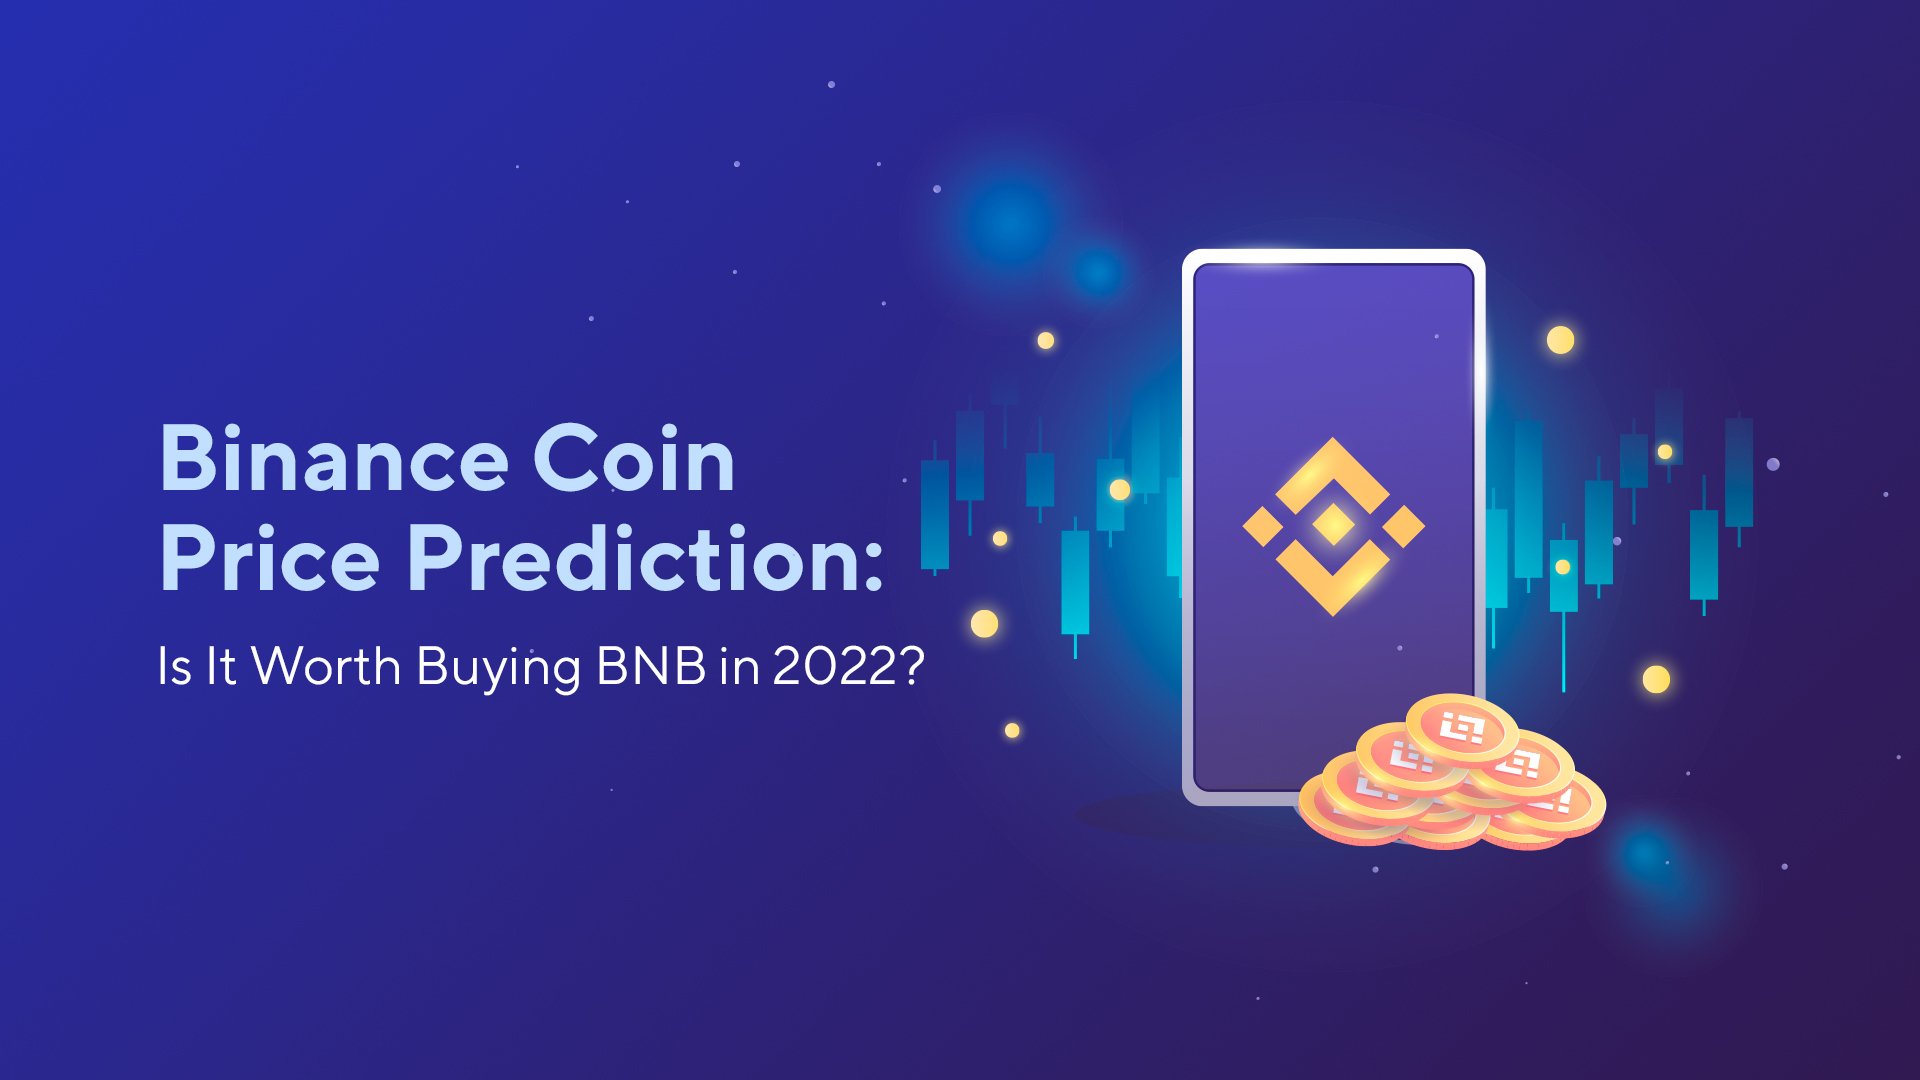 Binance Coin Price Prediction: Is It Worth Buying BNB in 2022?